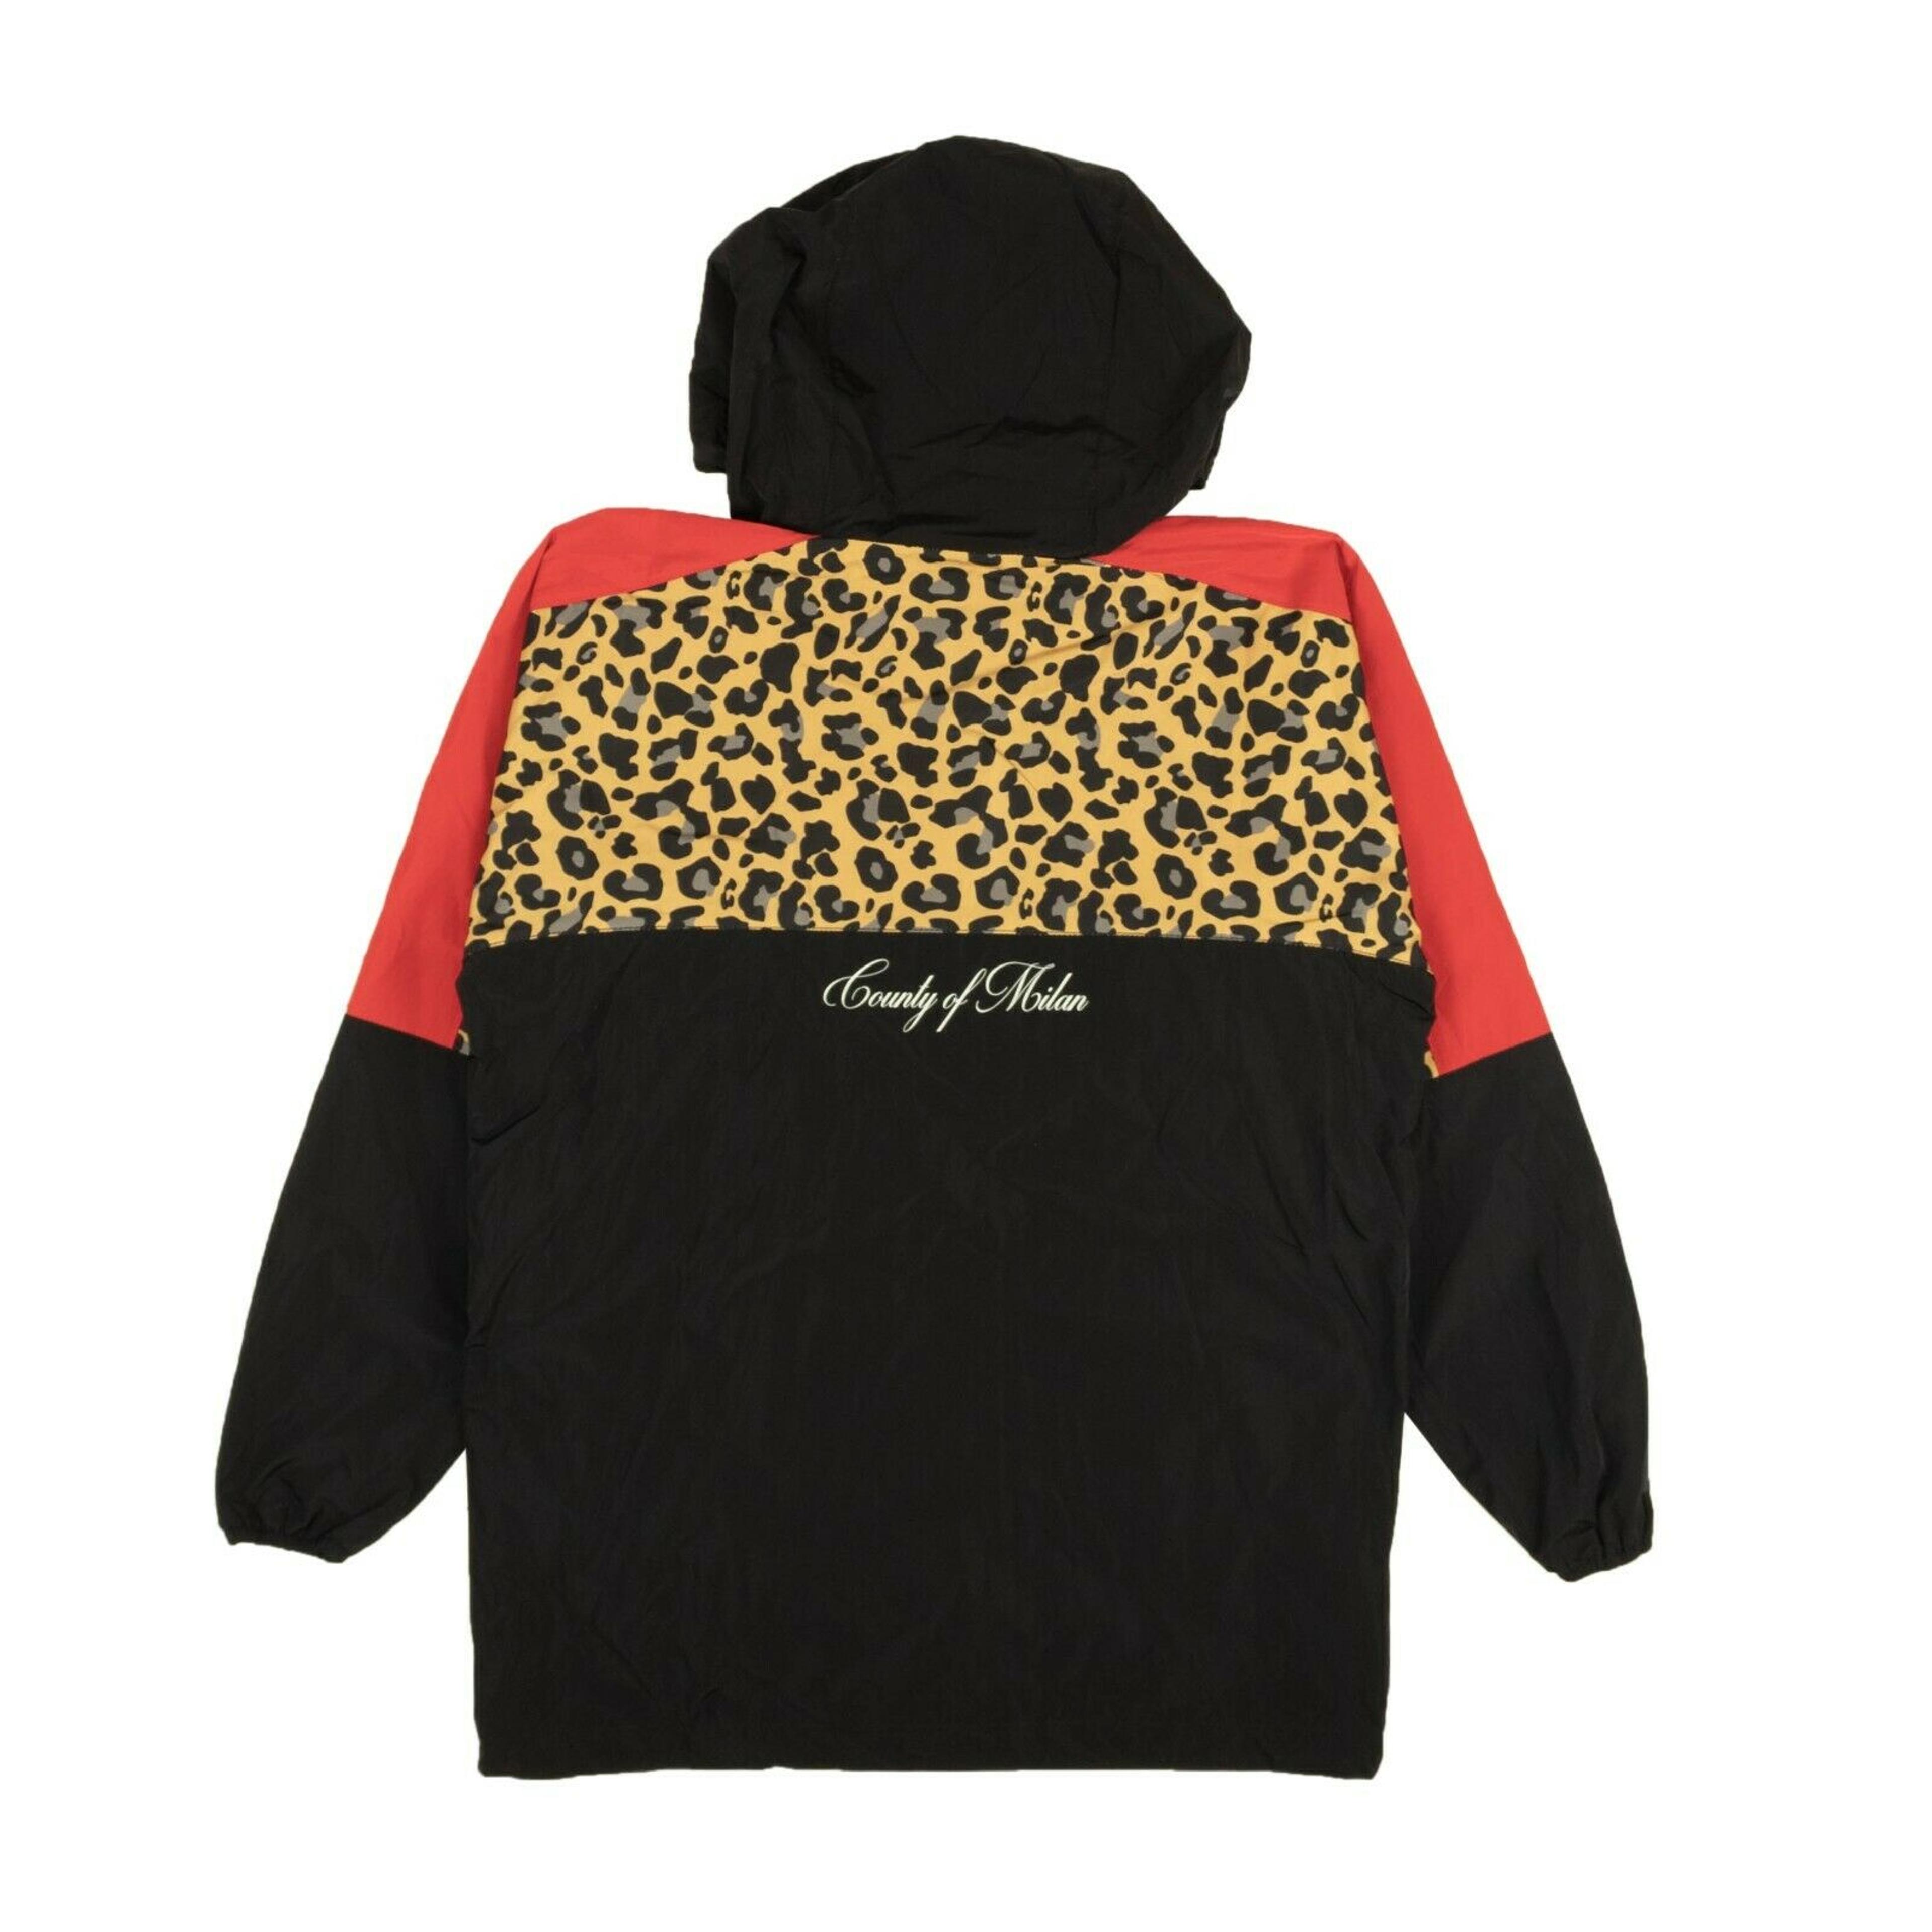 Alternate View 1 of Black And Red Leopard Windbreaker